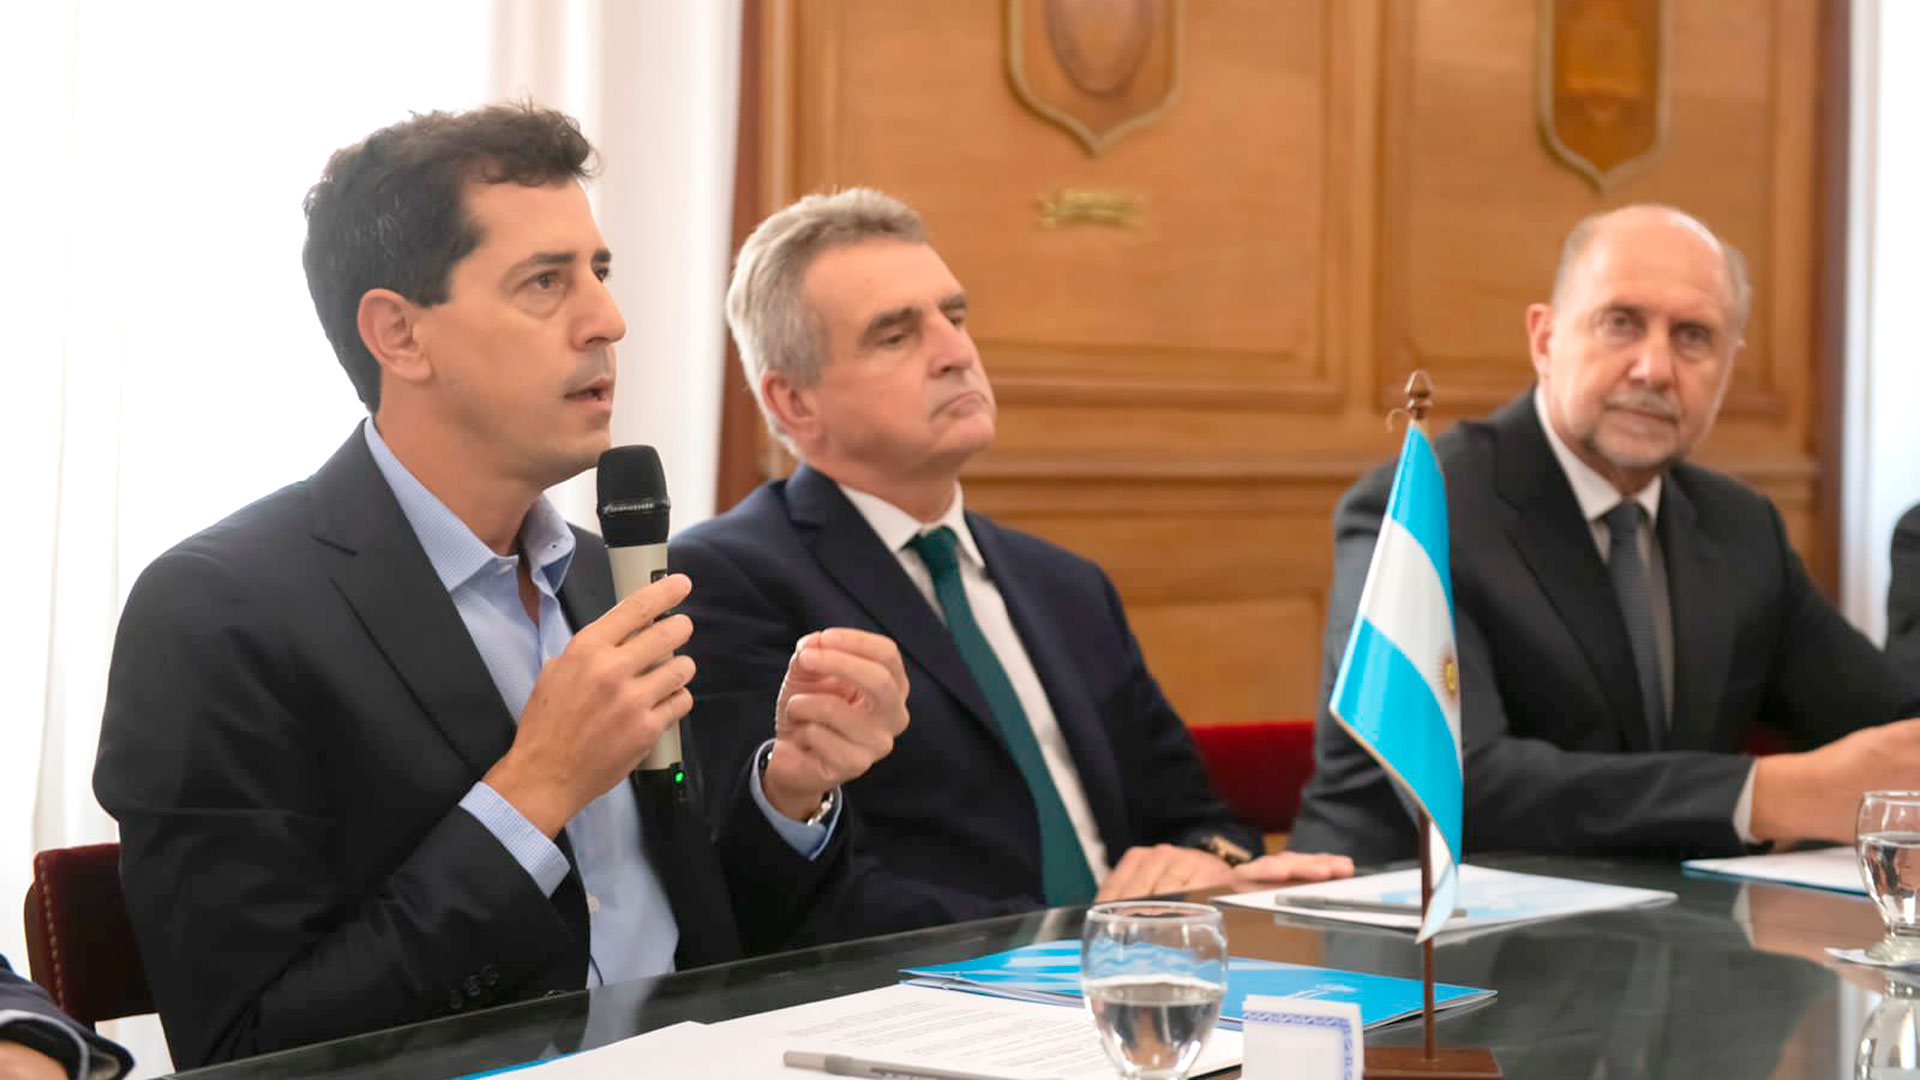 Eduardo "Road" of Pedro together with Agustín Rossi.  One is a virtual candidate and the other will confirm today that he will compete in the PASO (Presidency)